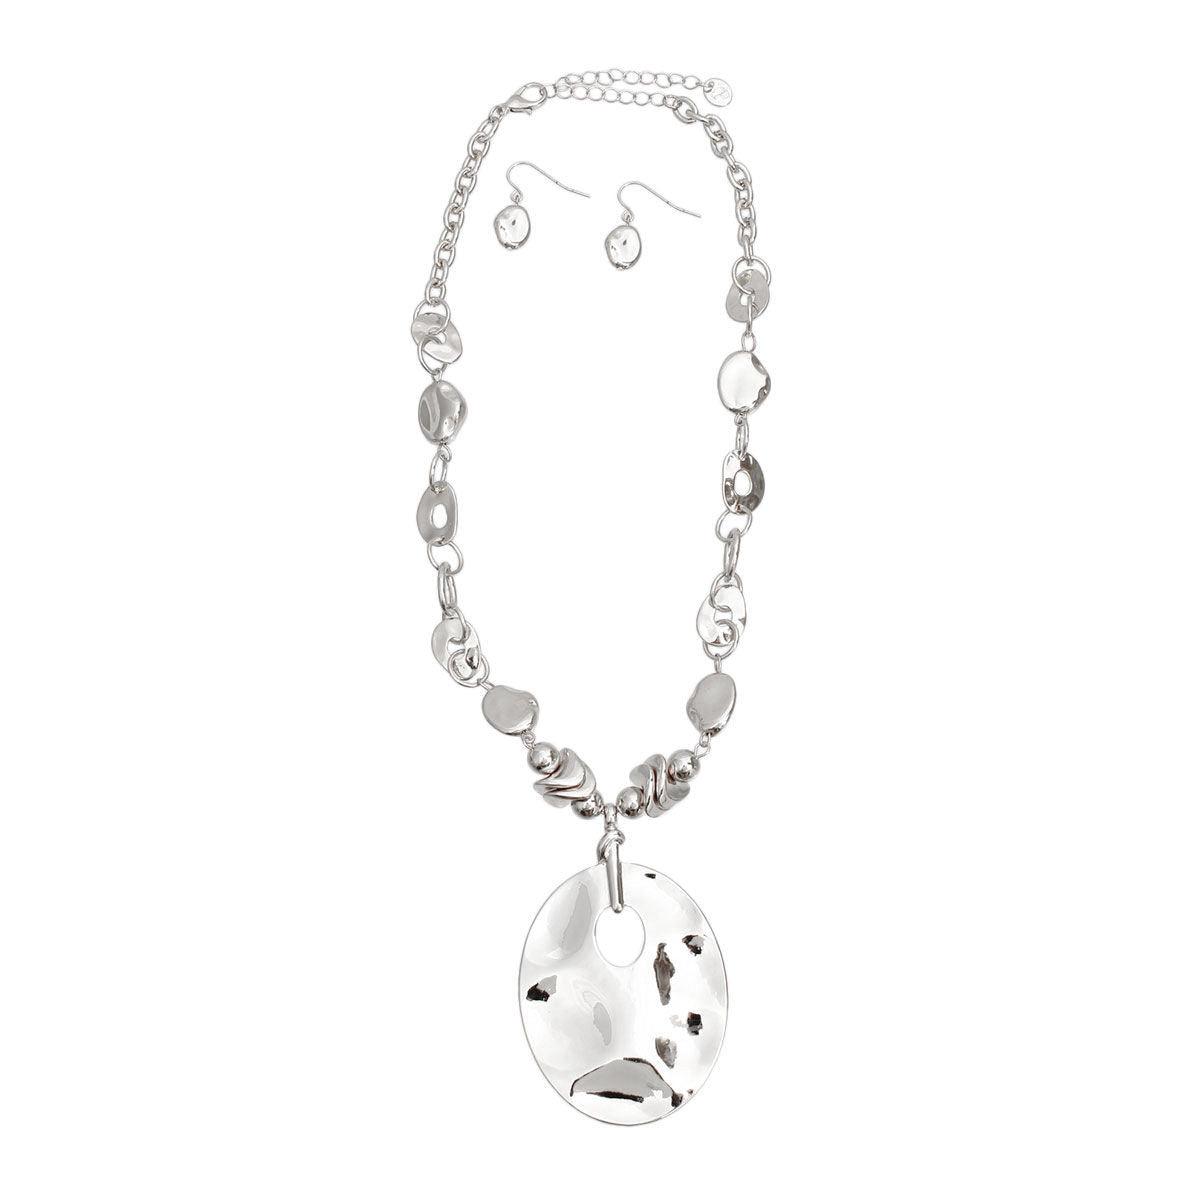 Step Up Your Style Game: Trendy Silver Tone Necklace and Earrings Set